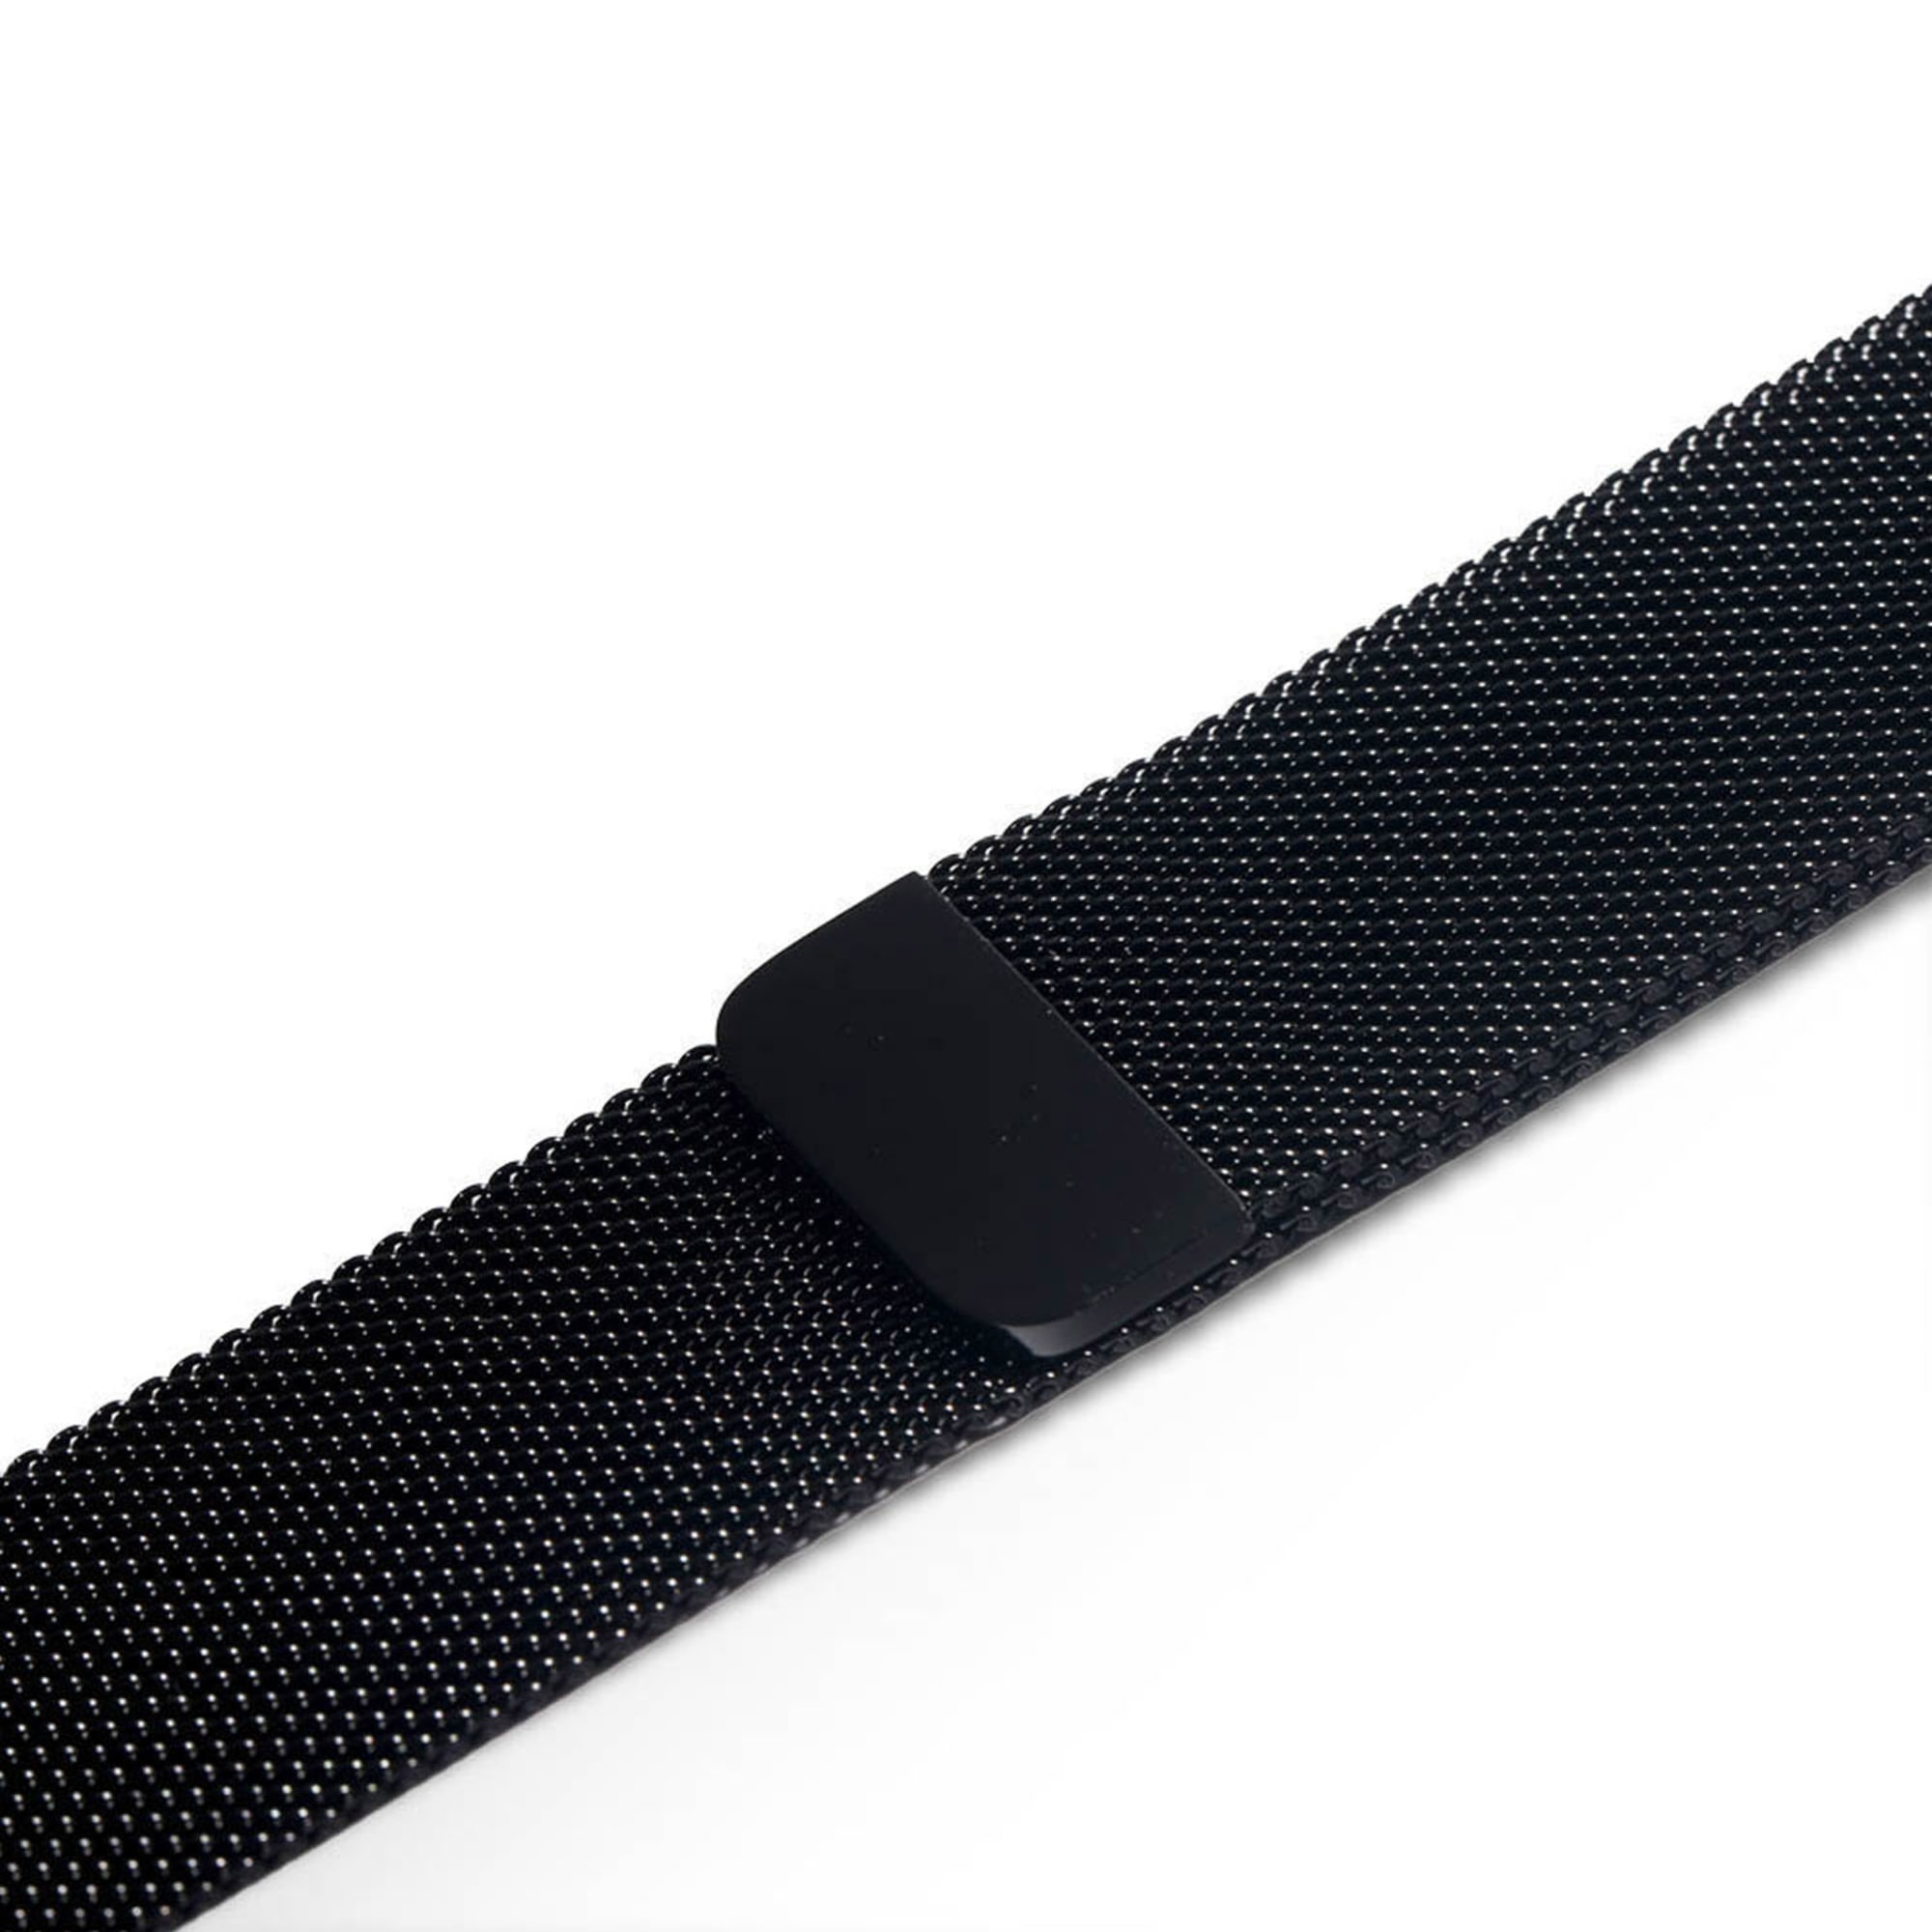 OTM Essentials™ Stainless Steel Mesh Band For Apple® Watch, Black - image 2 of 2